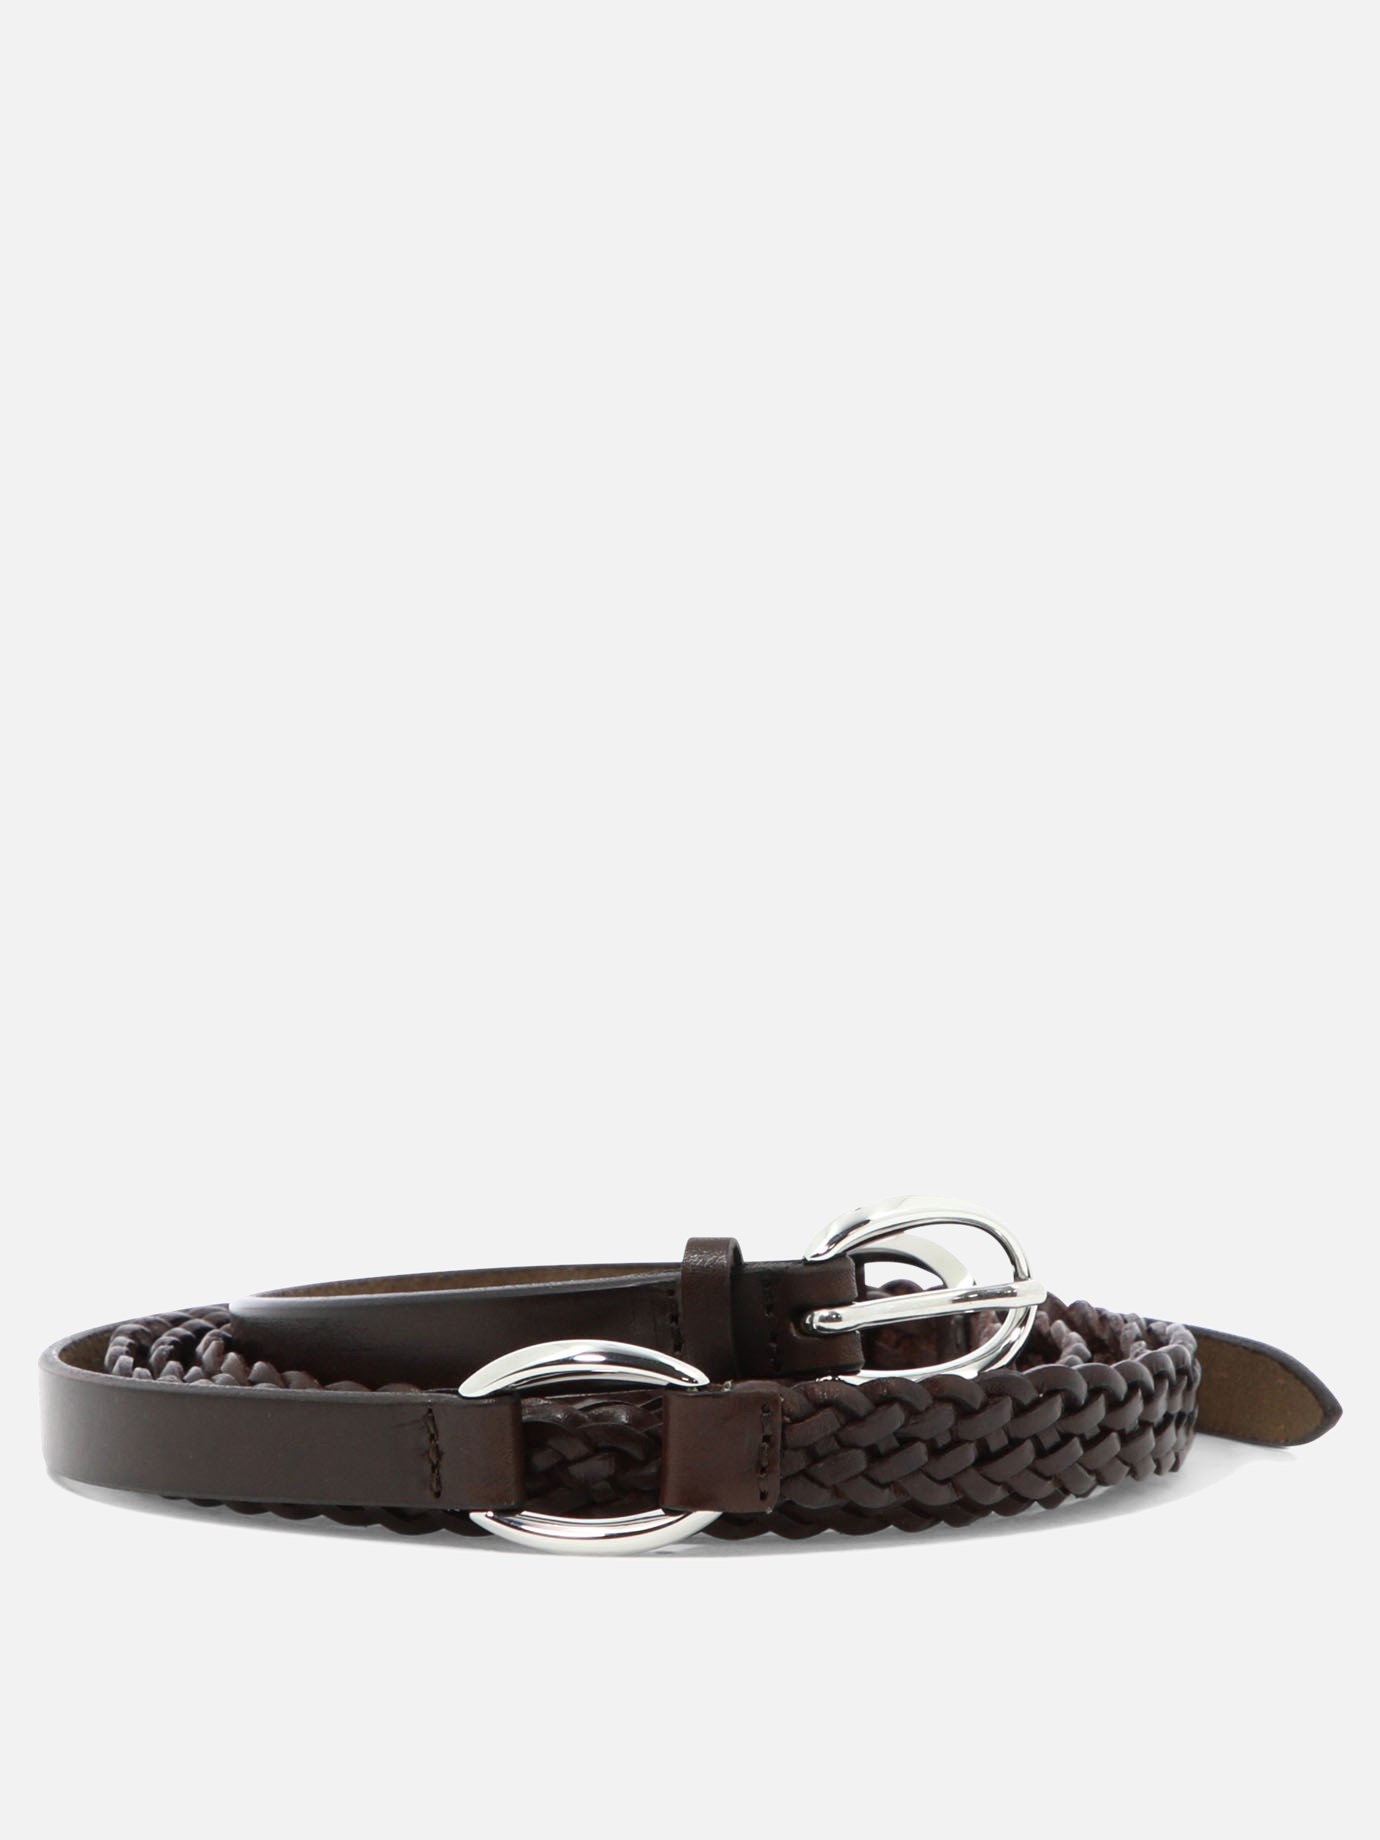 Woven leather beltby Orciani - 0